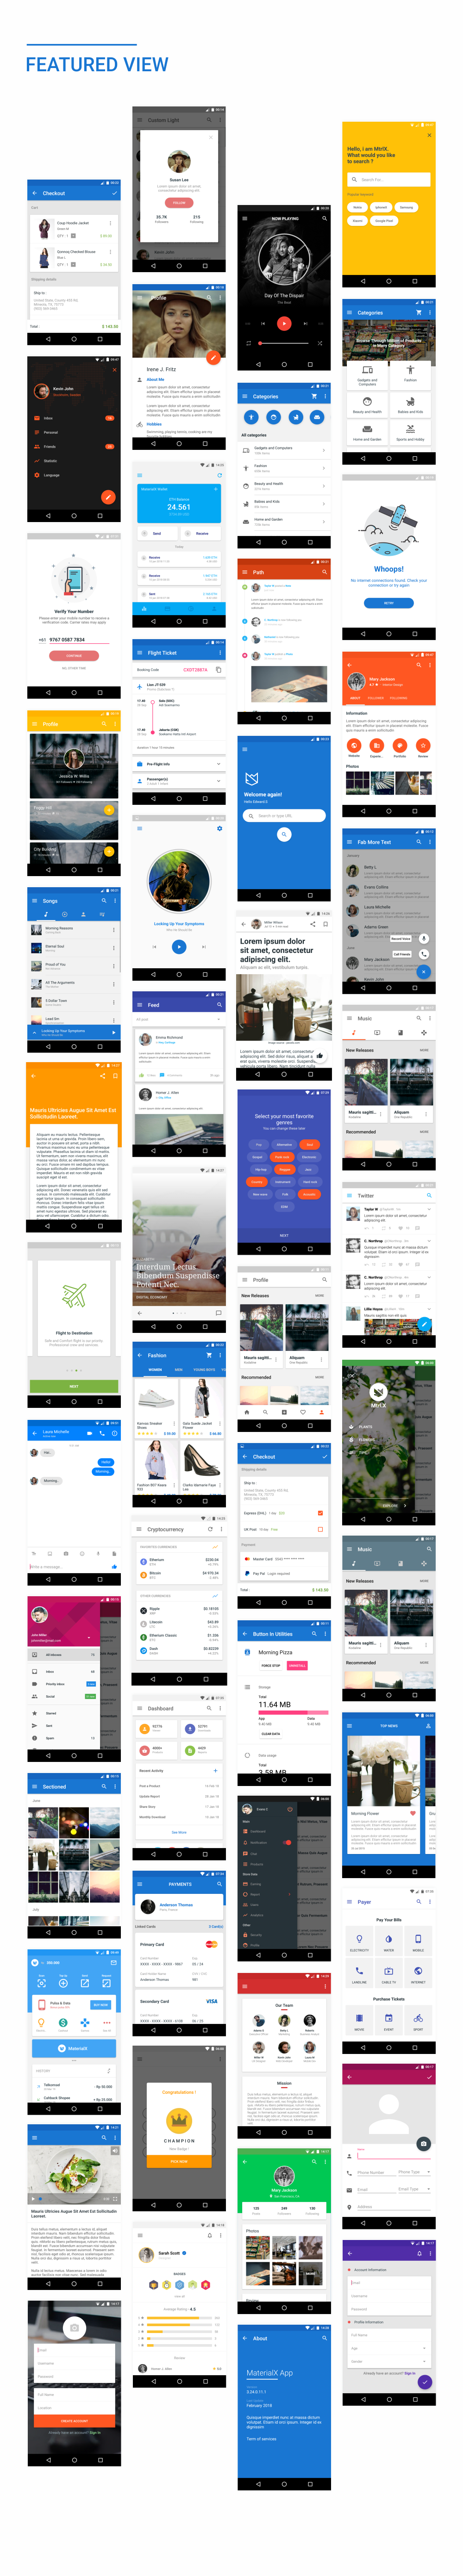 MaterialX - Android Material Design UI Components 2.6 - 34